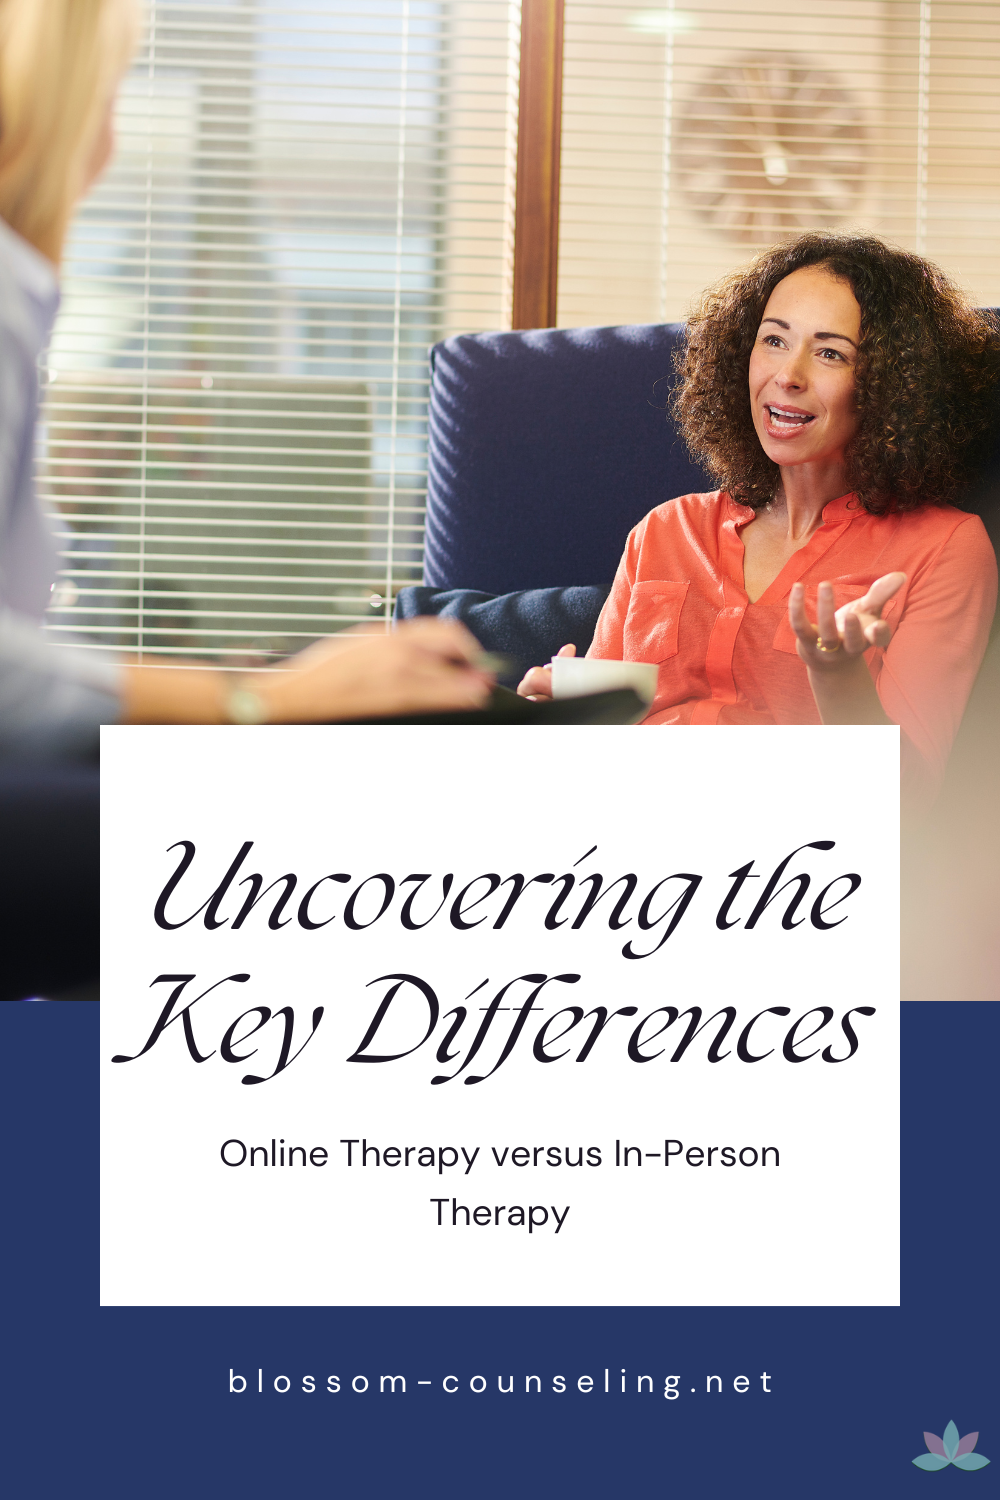 Uncovering the Key Differences: Online Therapy versus In-Person Therapy